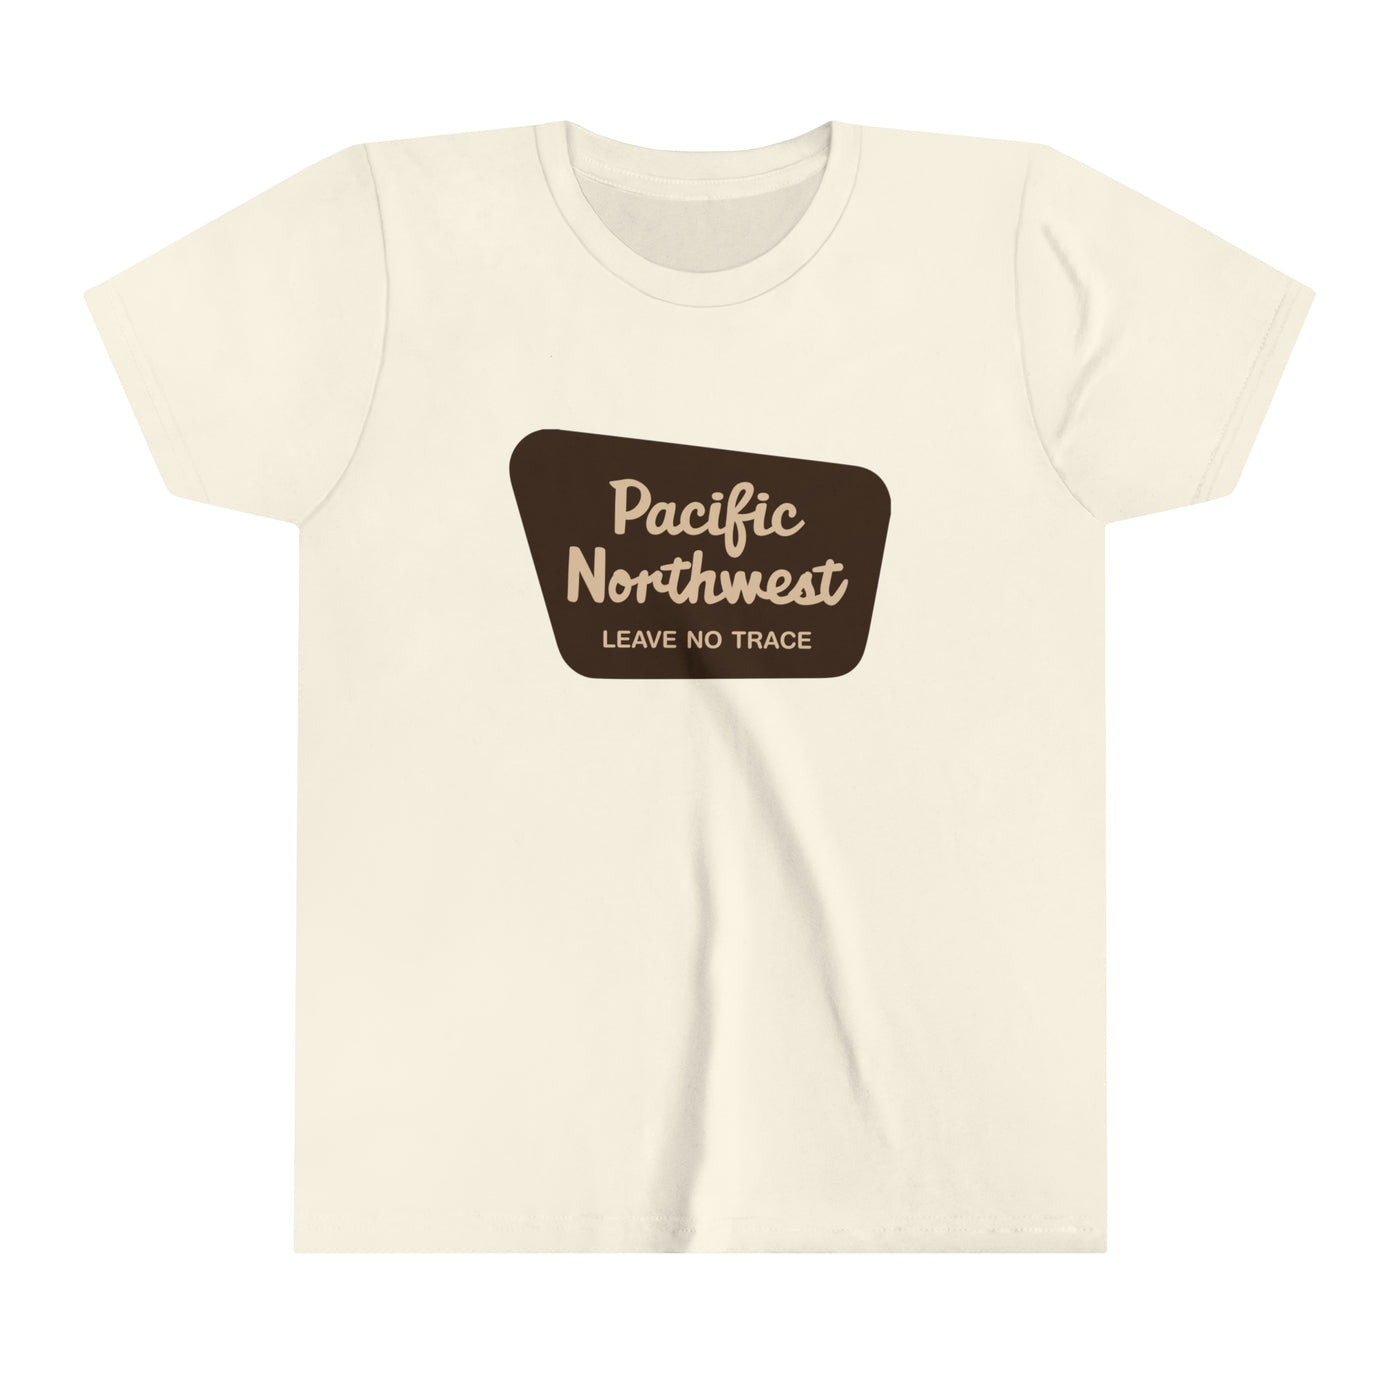 Pacific Northwest National Forest Kids T-Shirt